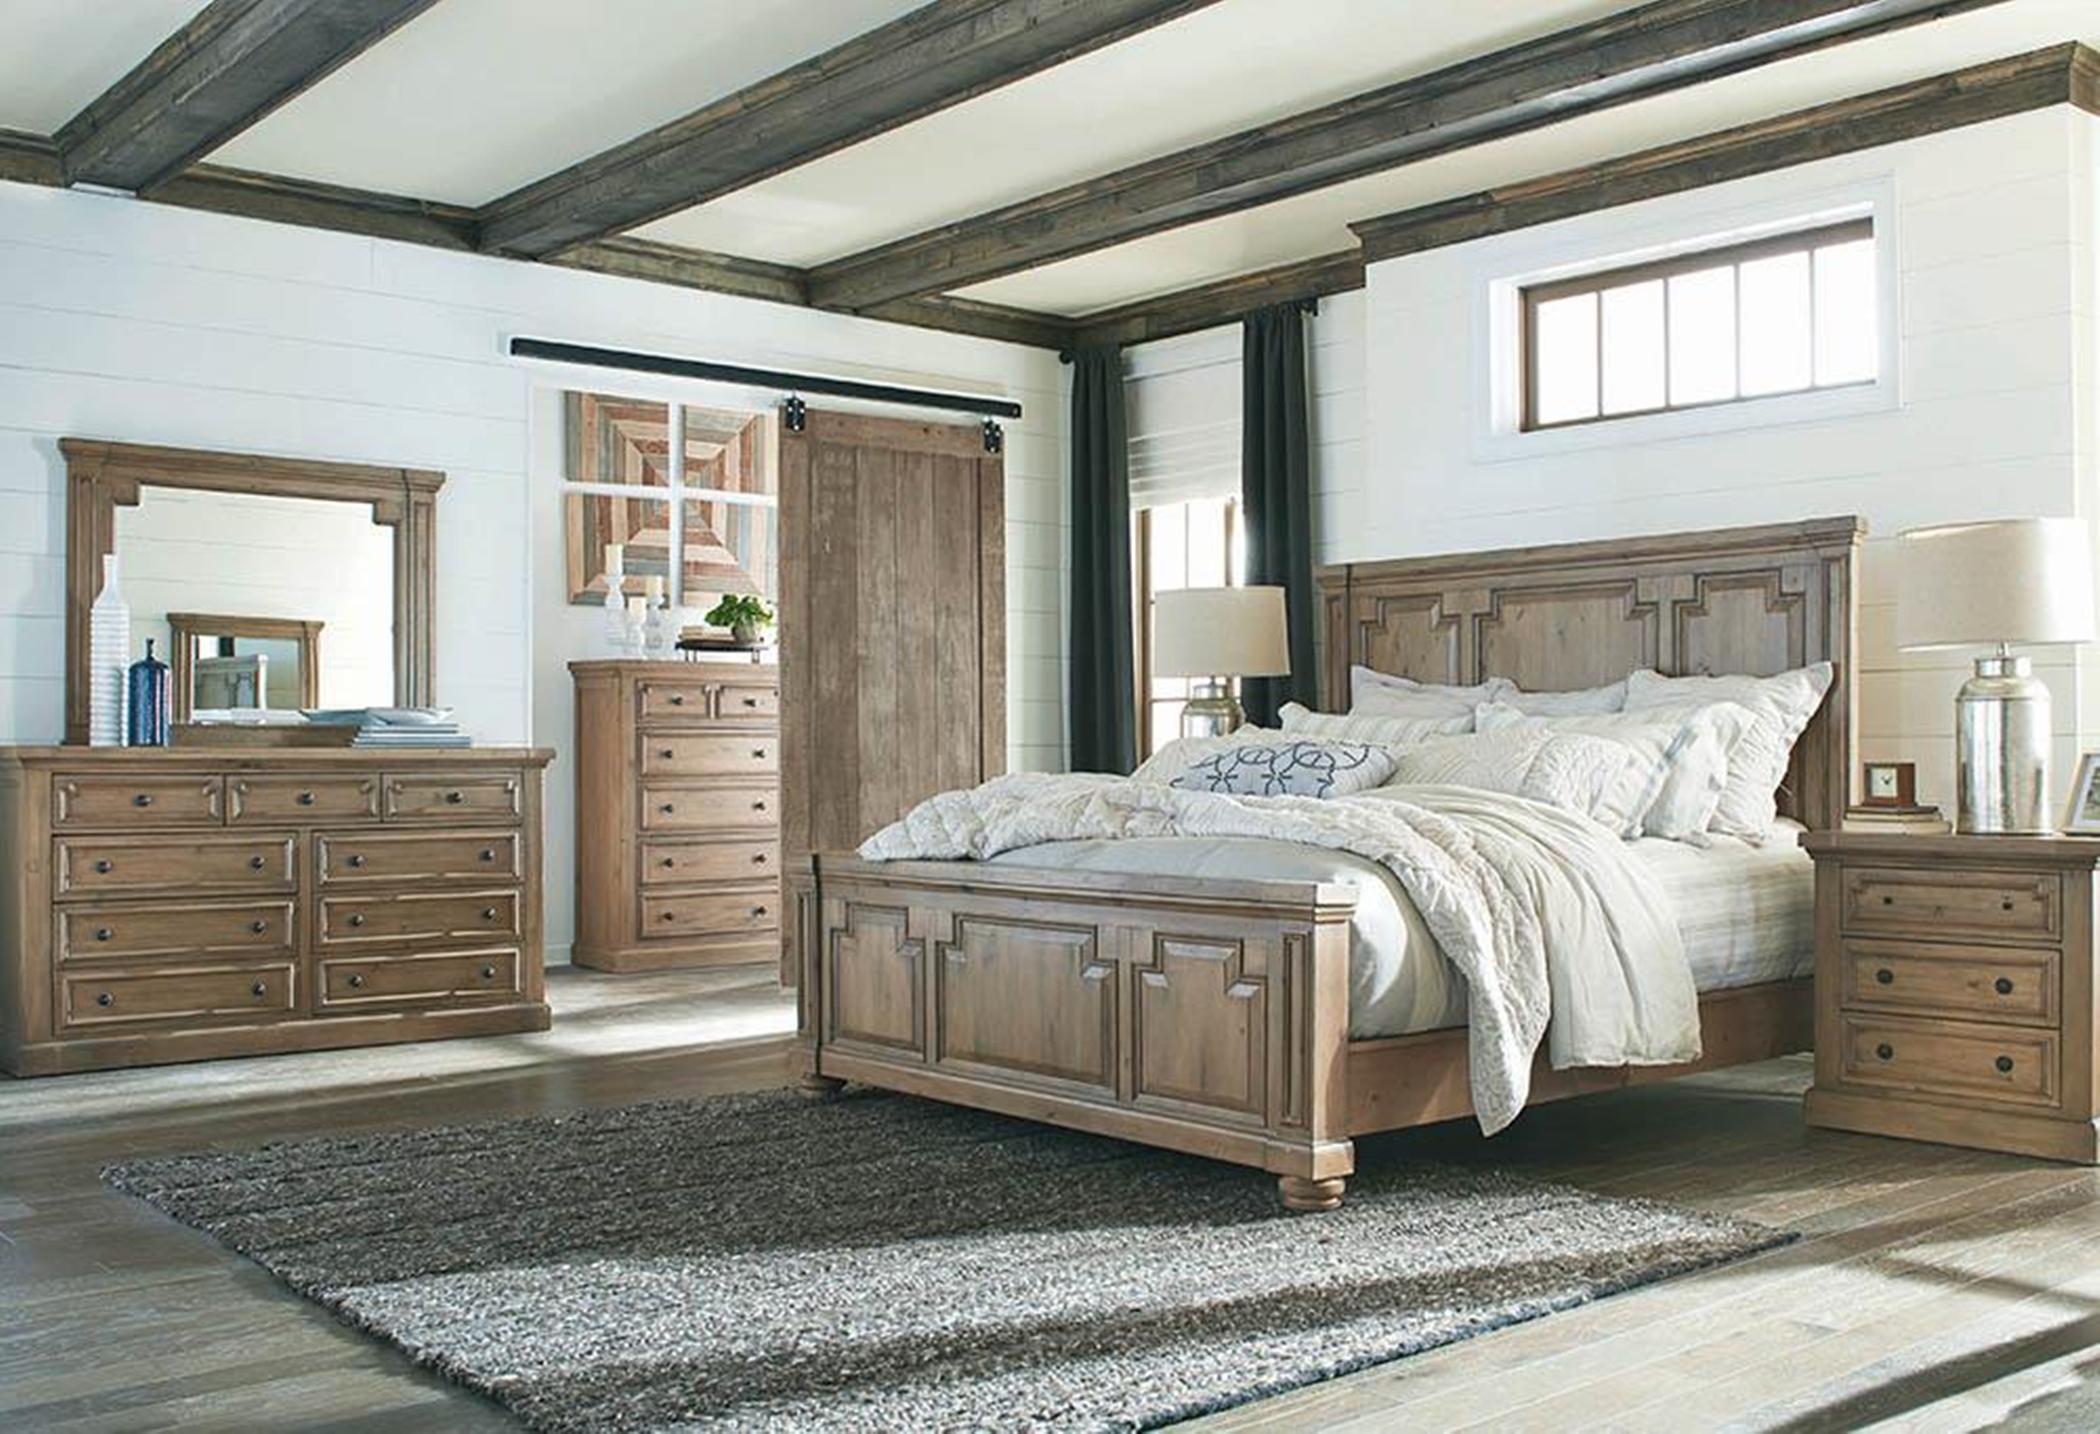 Florence Traditional Rustic Smoke Queen Bed